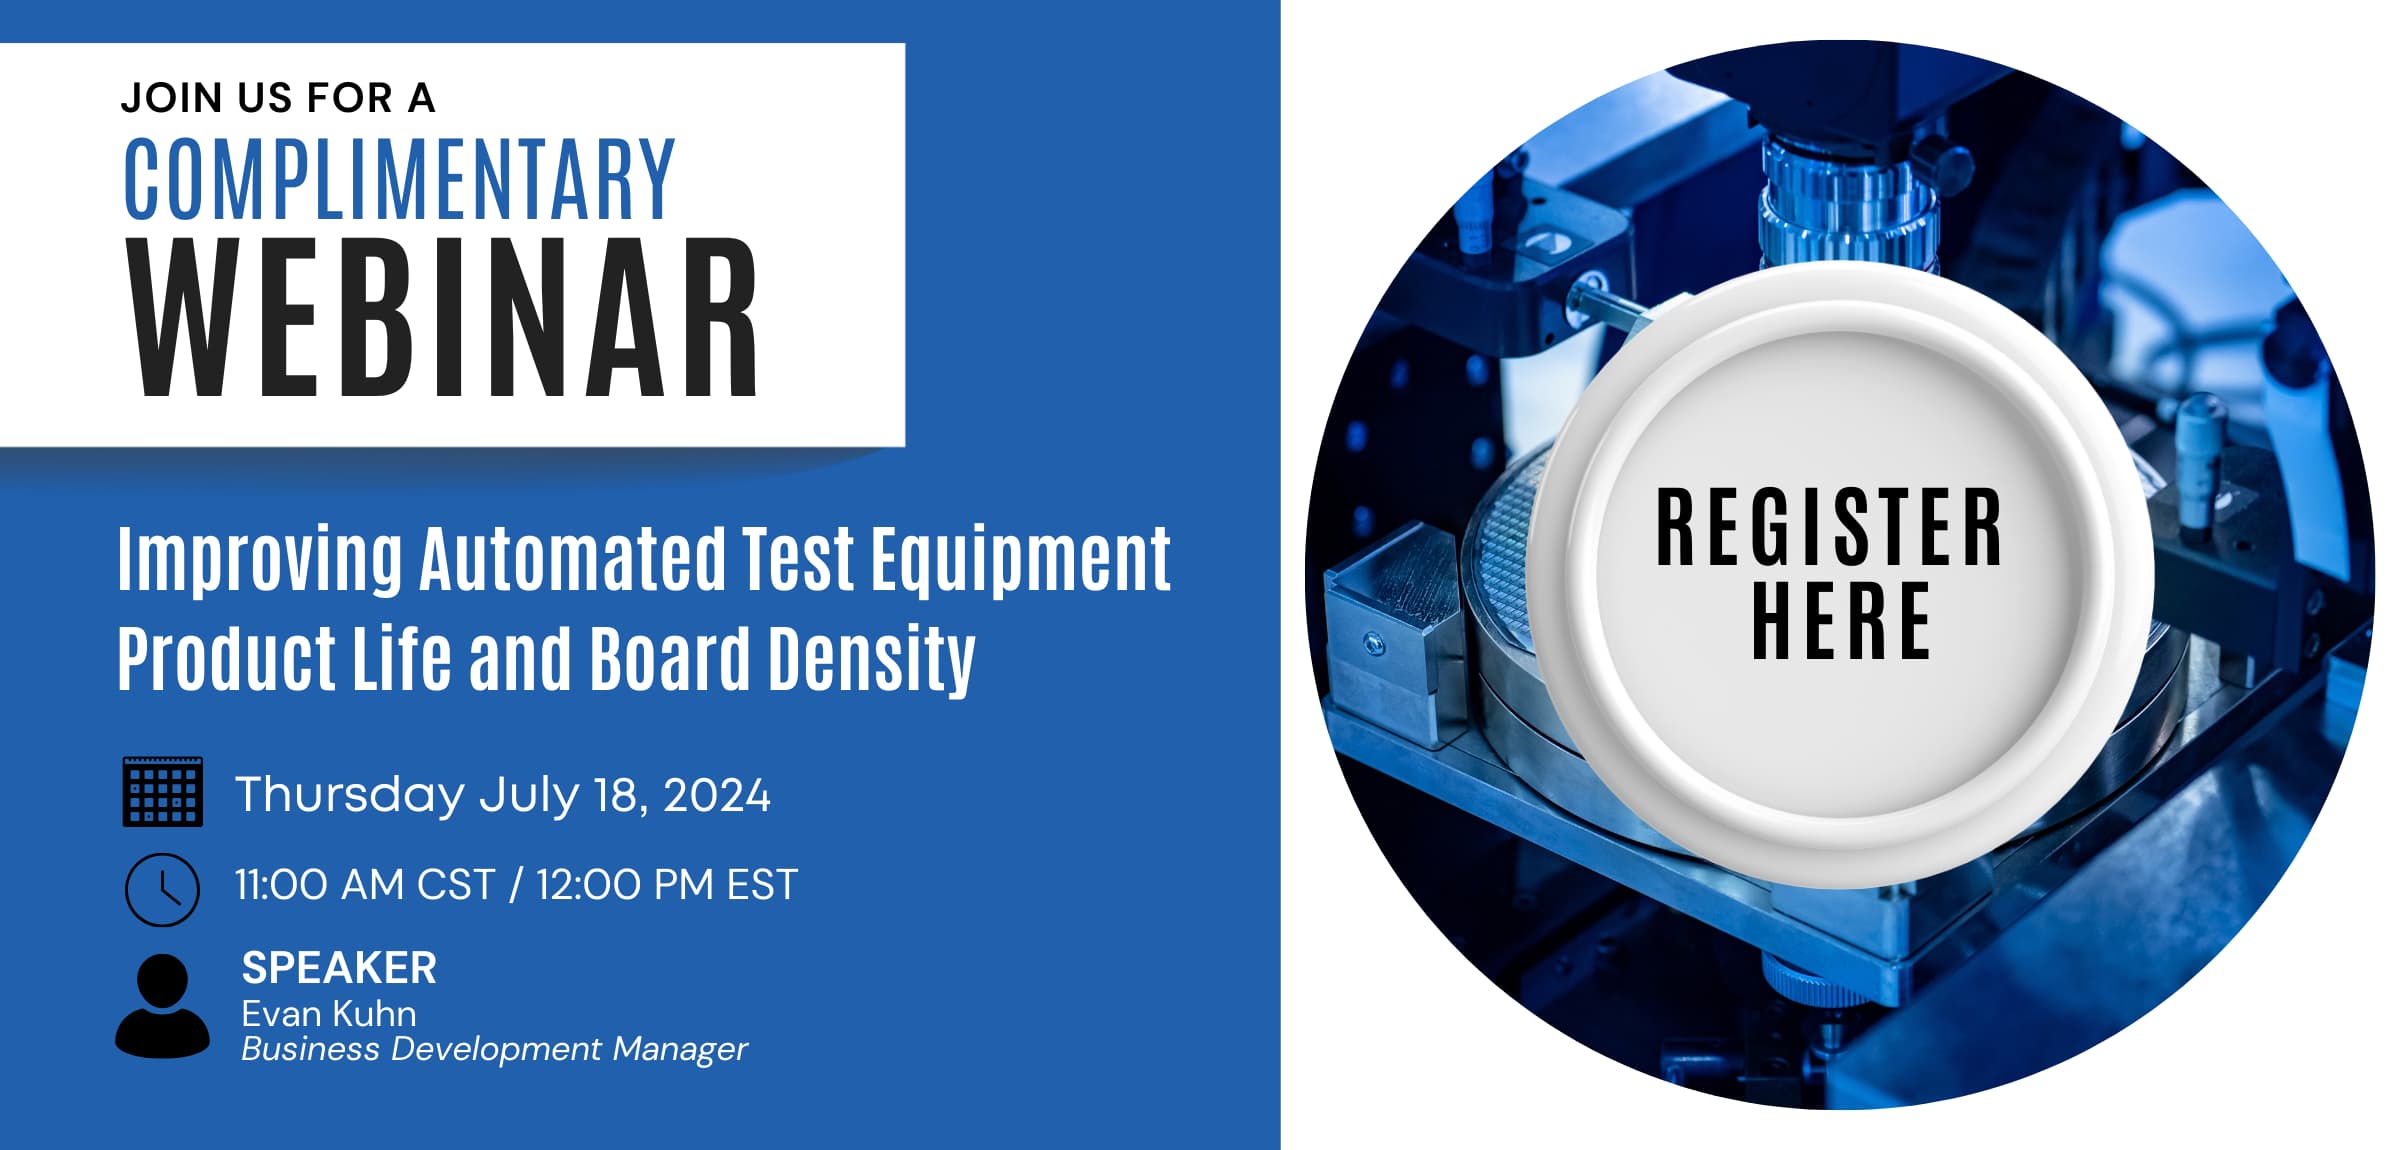 JOIN US FOR A COMPLIMENTARY WEBINAR | Improving Automated Test Equipment Product Life and Board Density | Thursday July 18, 2024 | 11:00 AM CST / 12:00 PM EST | SPEAKER Evan Kuhn Business Development Manager | REGISTER HERE